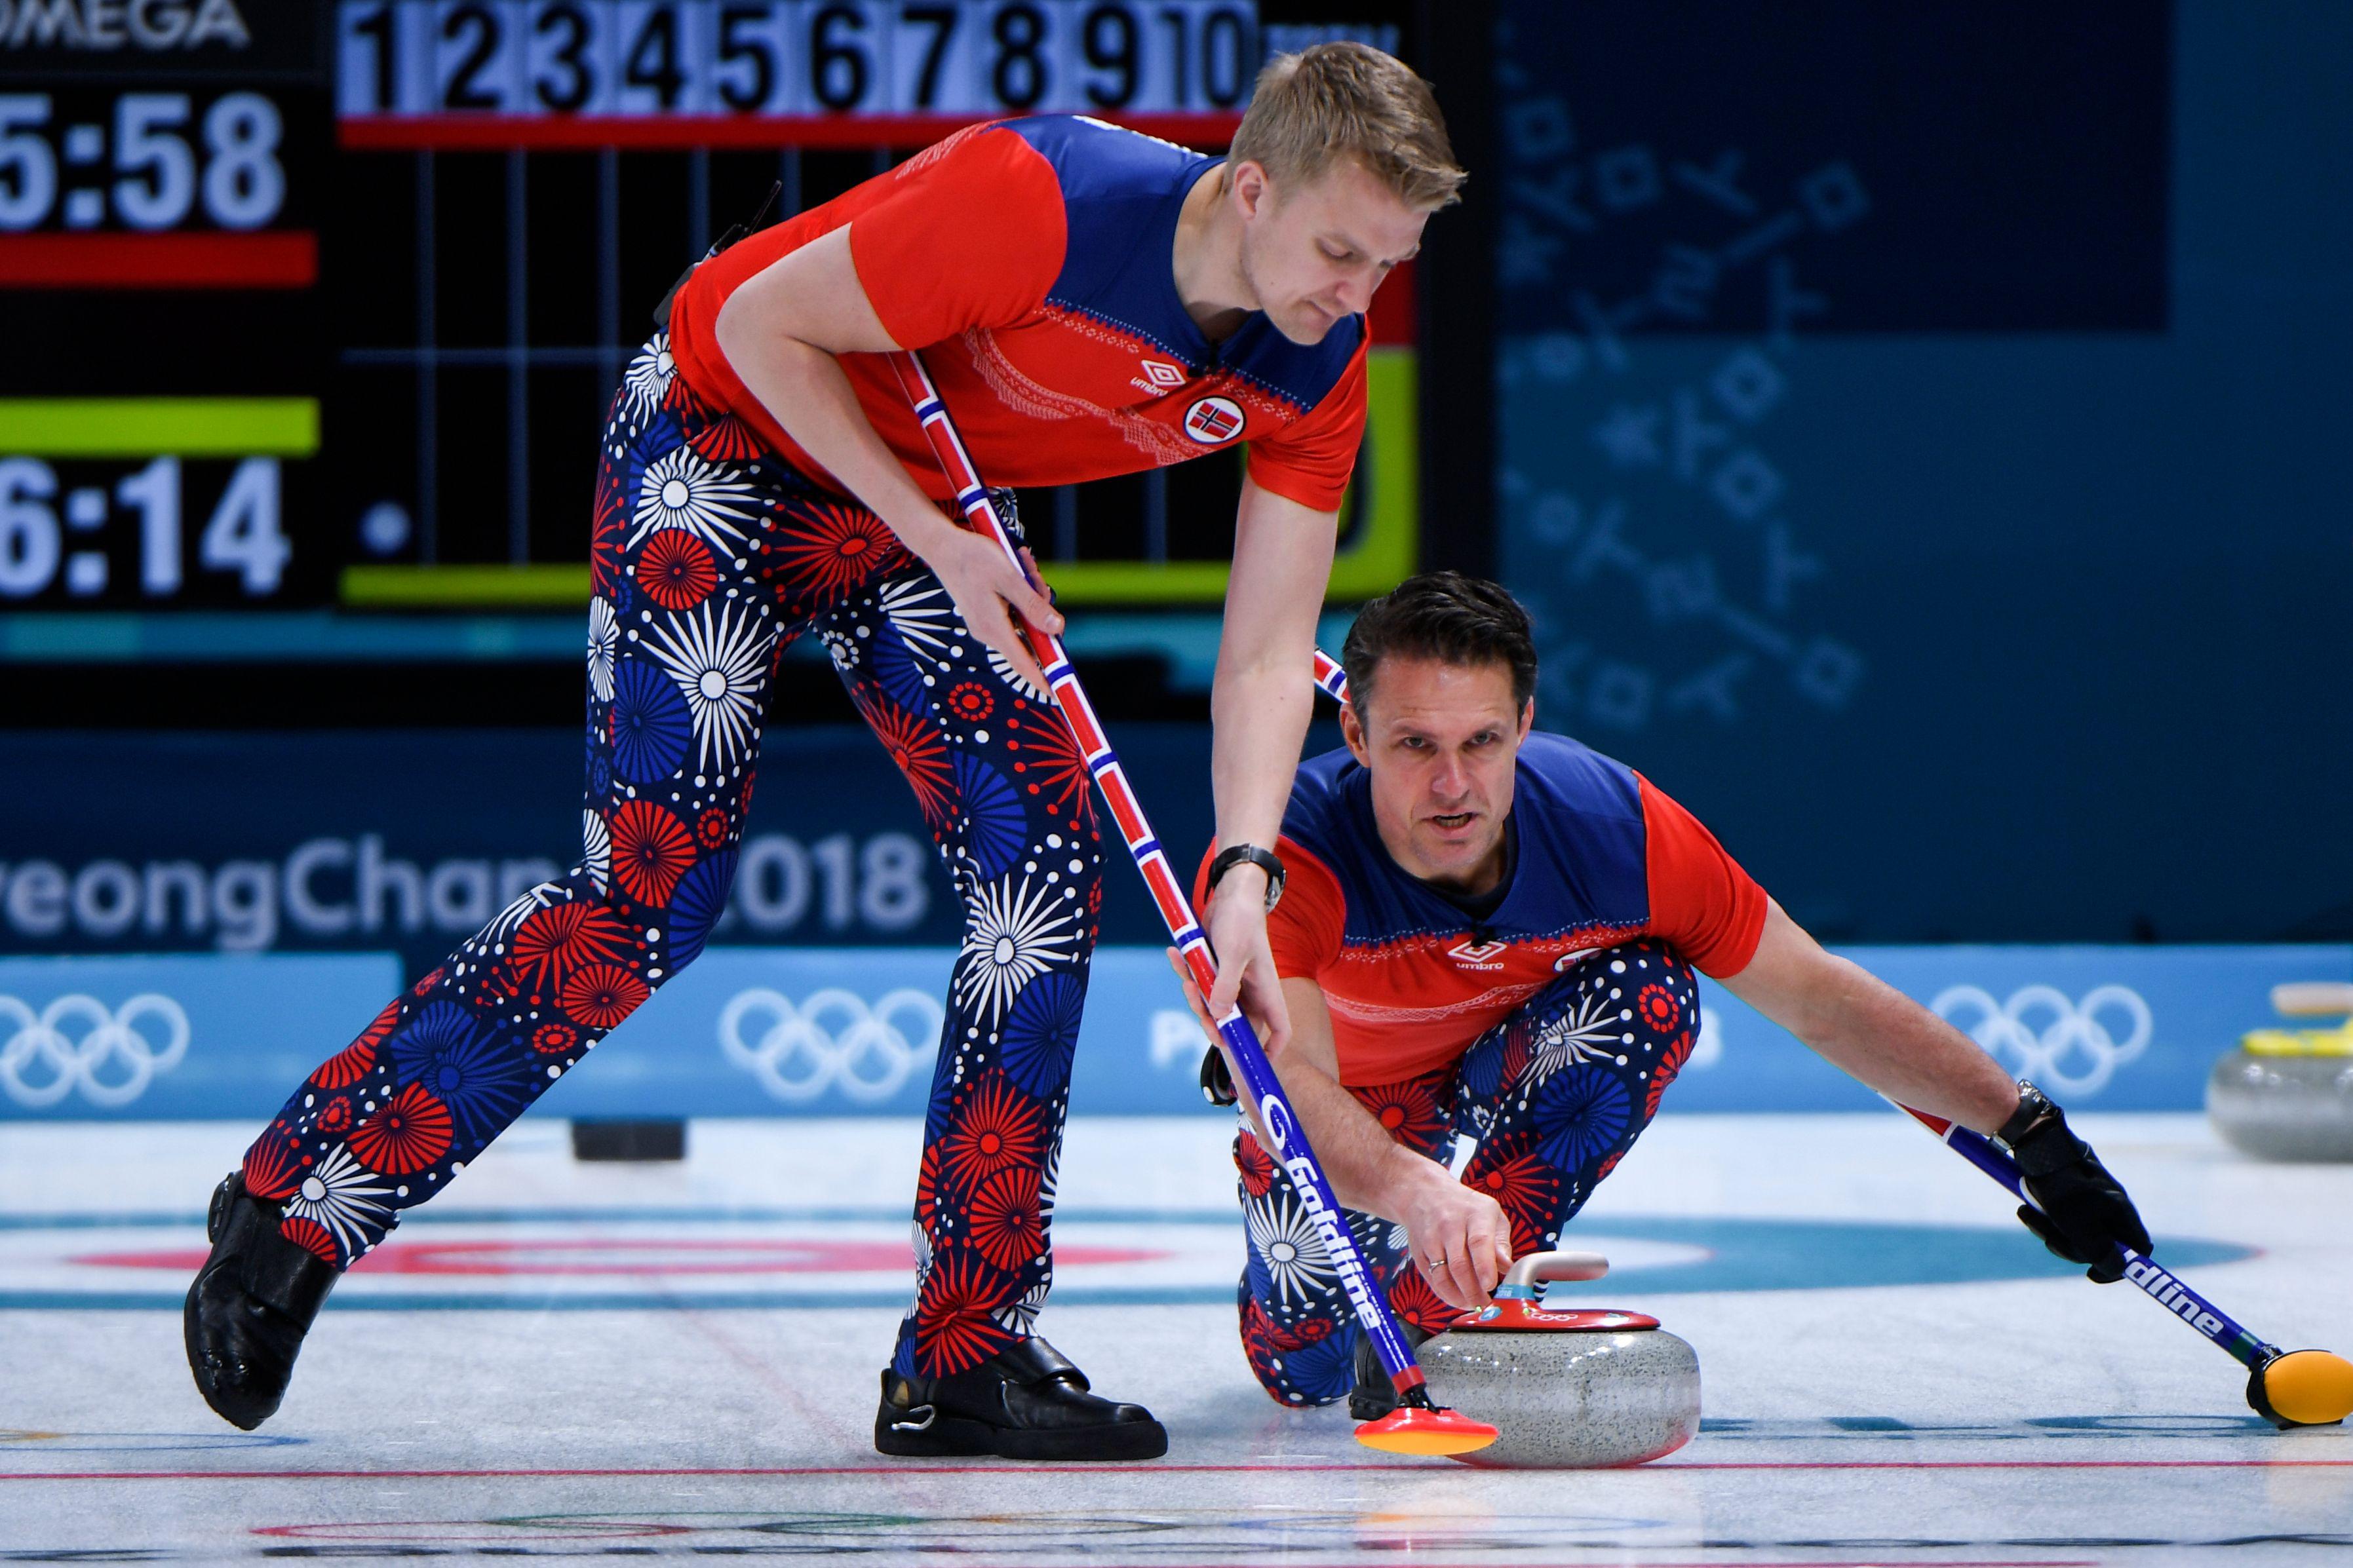 Norway's Thomas Ulsrud pushes the stone during the curling men's round robin session between Norway and Denmark during the Pyeongchang 2018 Winter Olympic Games at the Gangneung Curling Centre in Gangneung on February 18, 2018. / AFP PHOTO / WANG Zhao        (Photo credit should read WANG ZHAO/AFP/Getty Images)